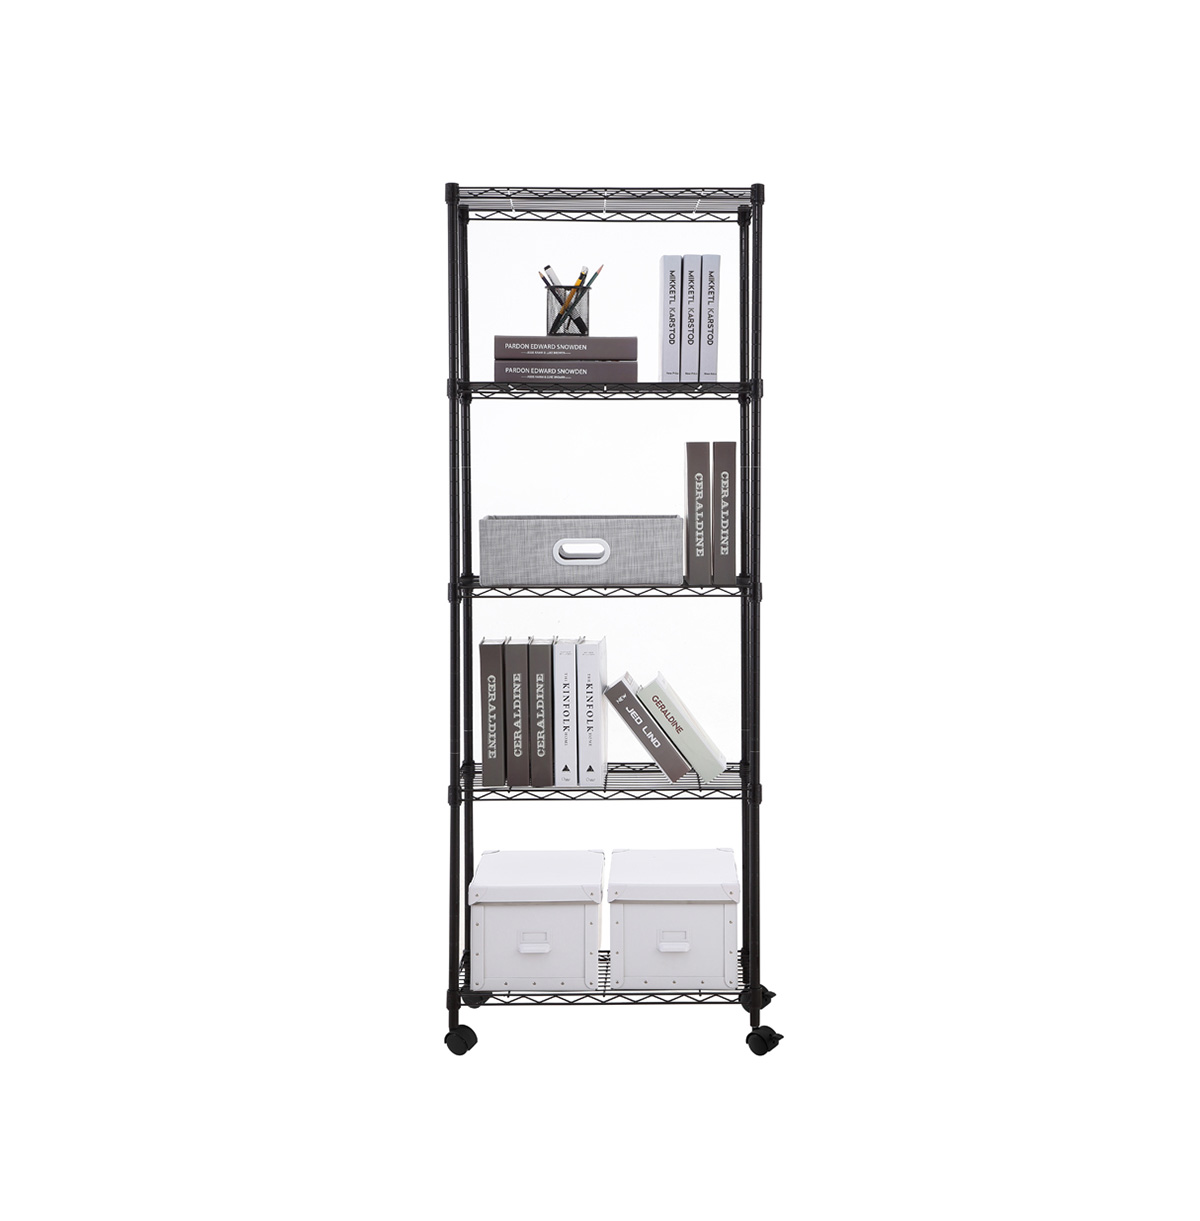 MZG Steel Storage Shelving 5-Tier with Wheels, Black